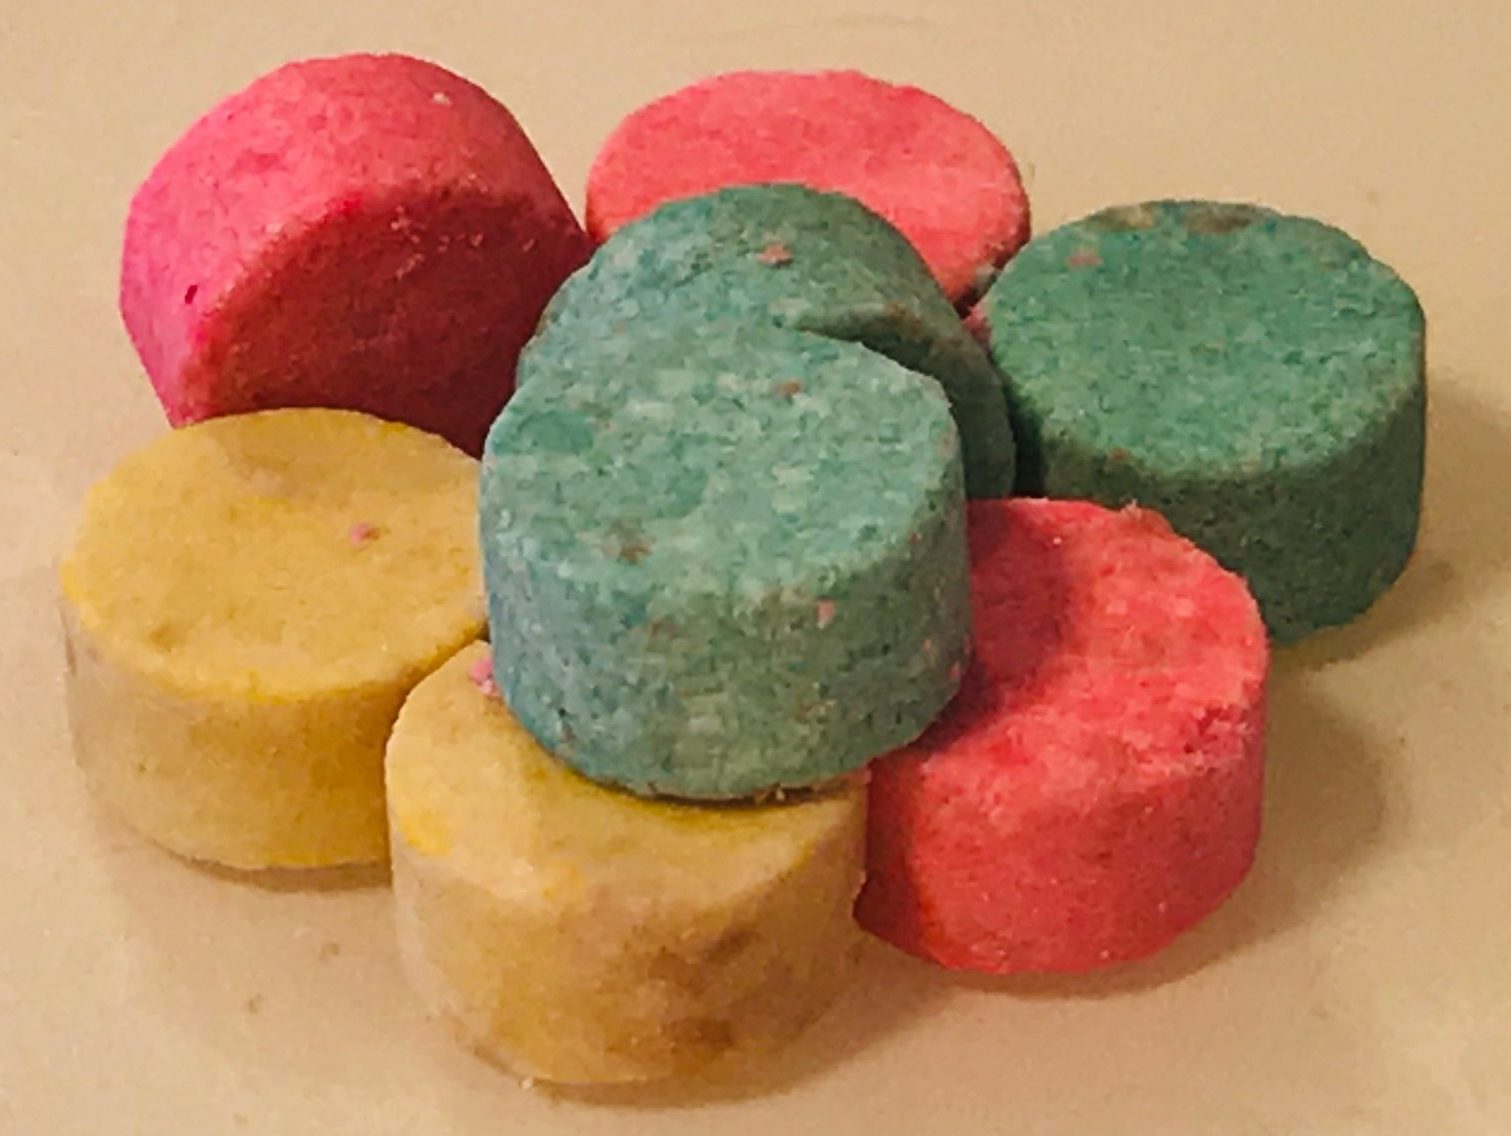 Toothy Tabs from LUSH in Toothy Fruity